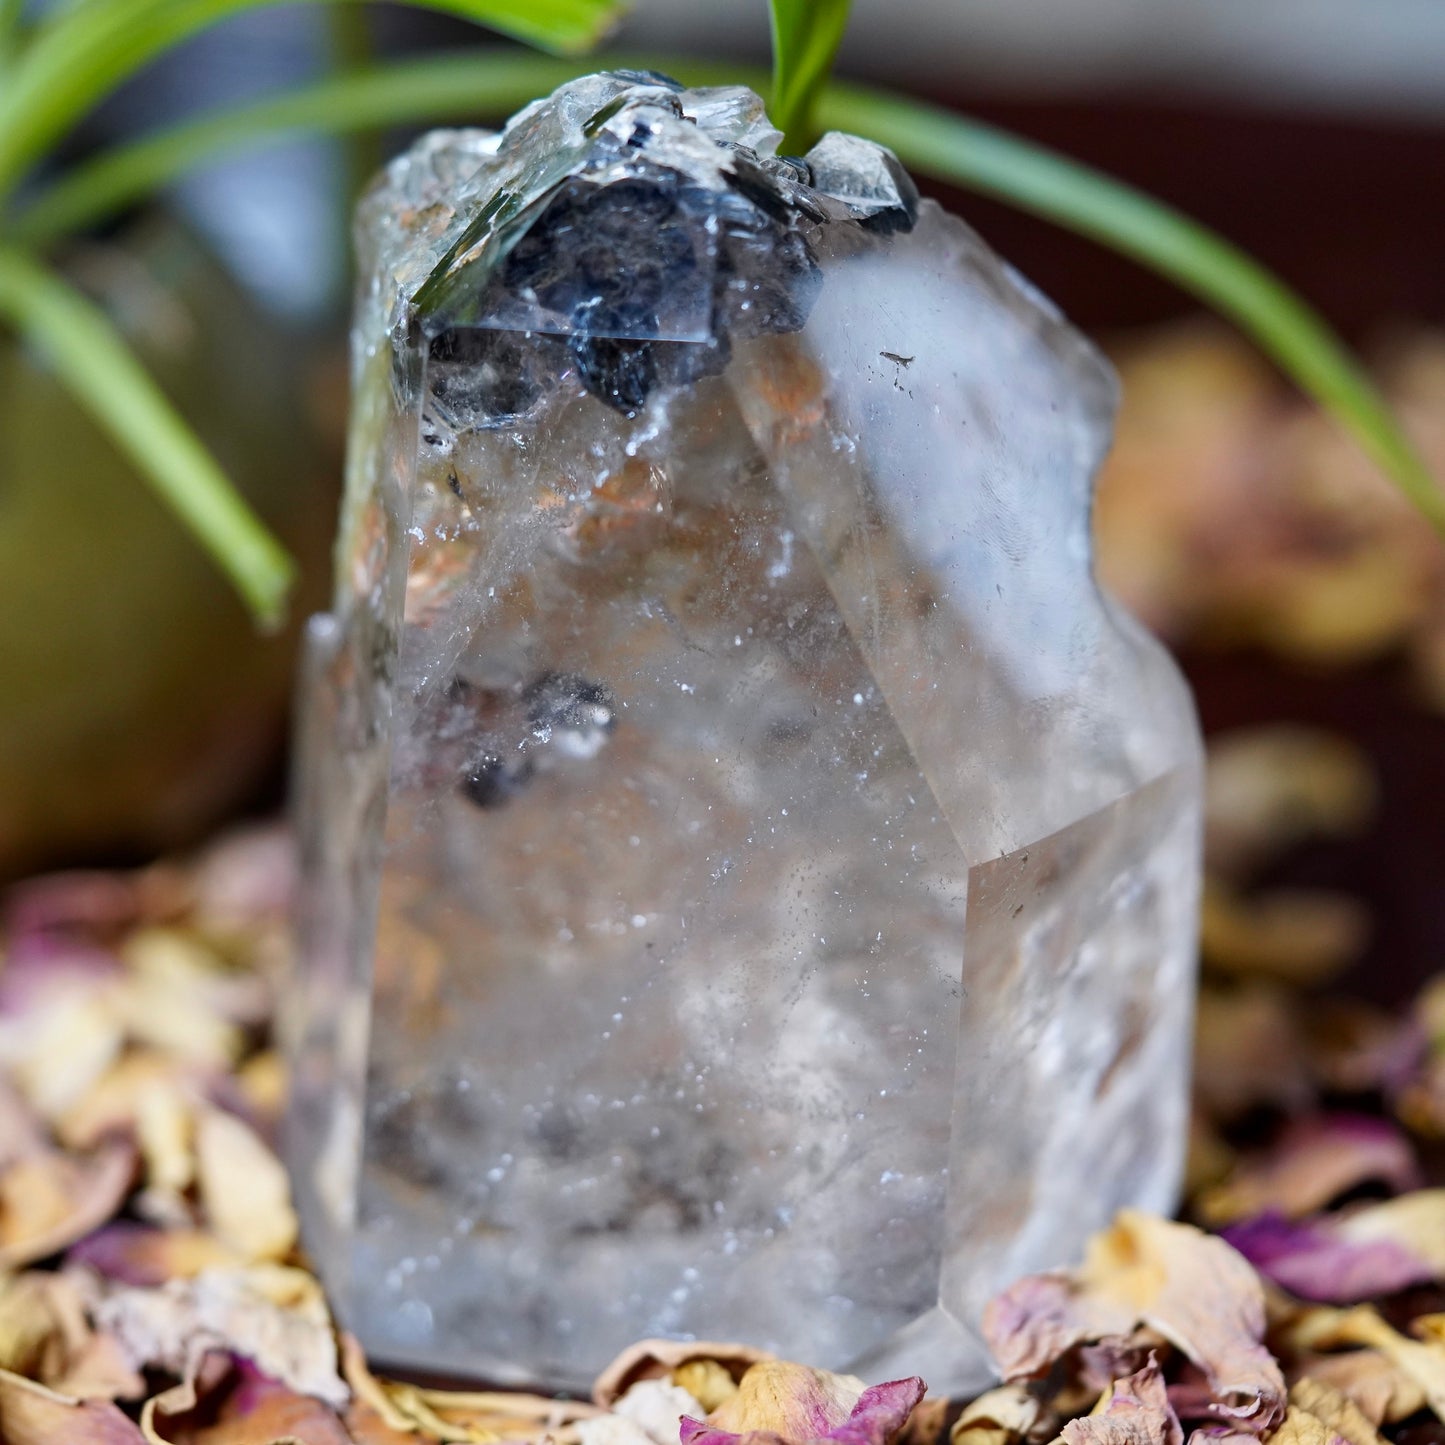 Load image into Gallery viewer, Chunky Clear Quartz tower with black Biotite Mica crystals on tip with dried roses and green plant in background
